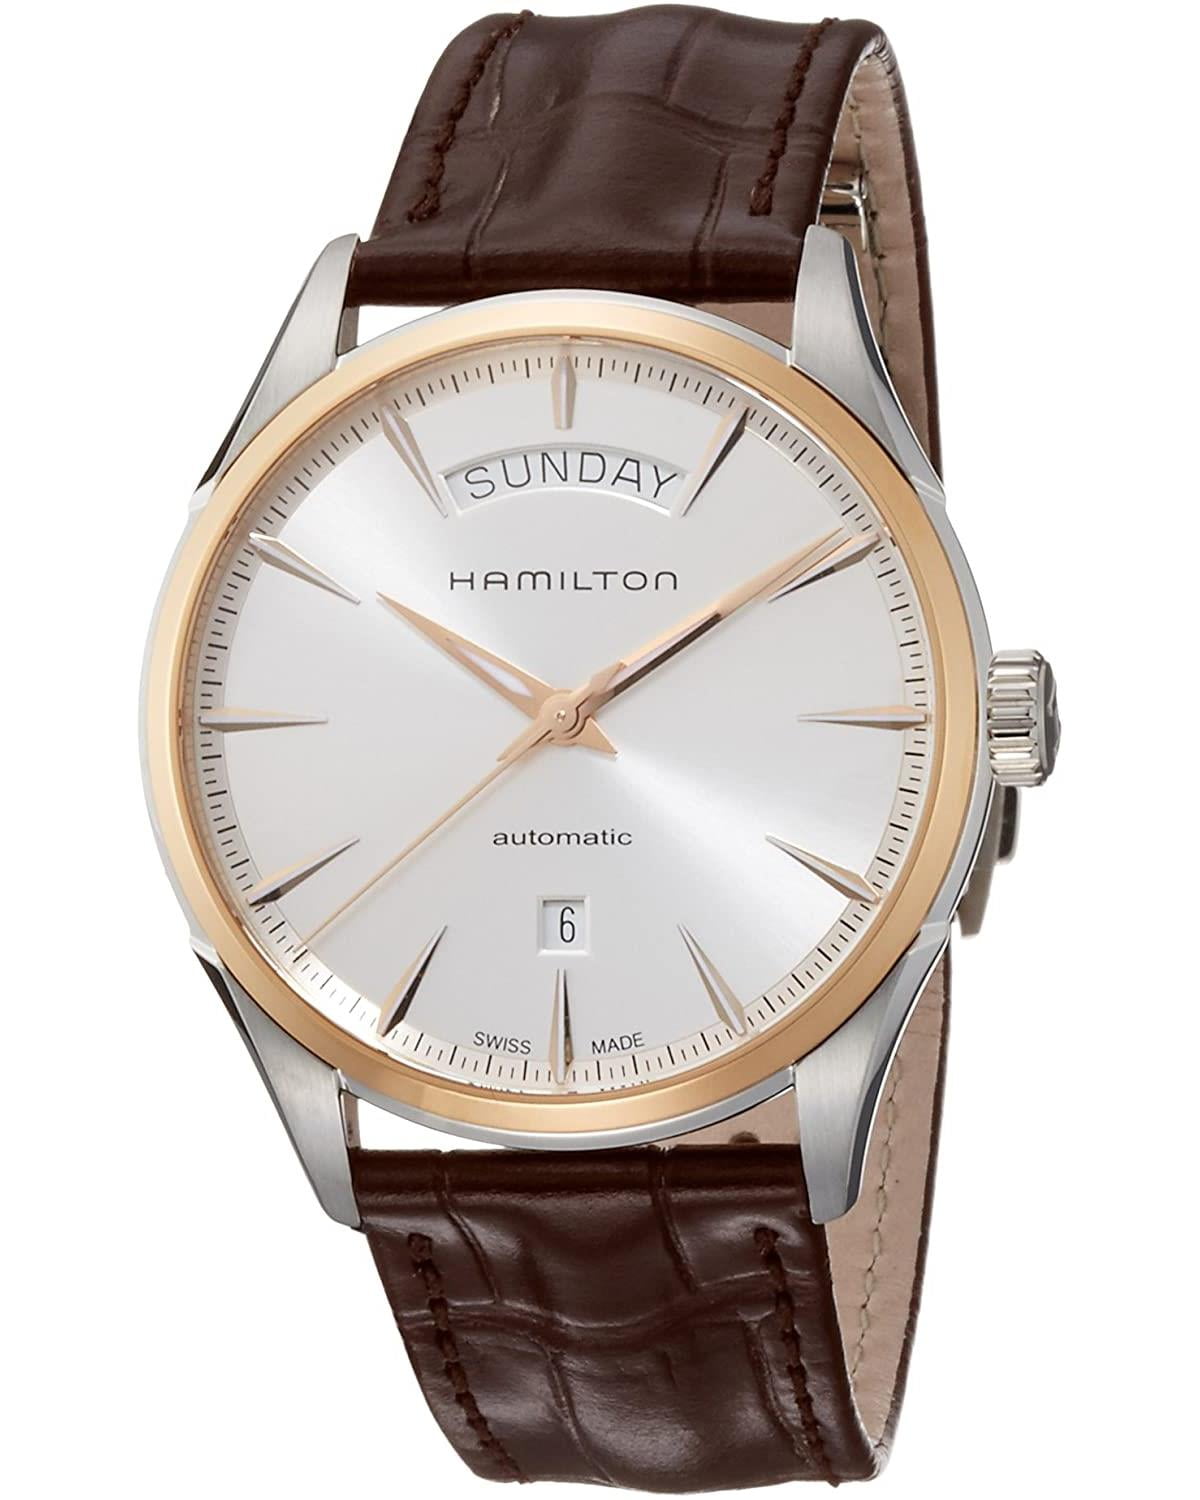 Hamilton Jazzmaster Automatic Silver Dial Mens Watch H42525551 ...